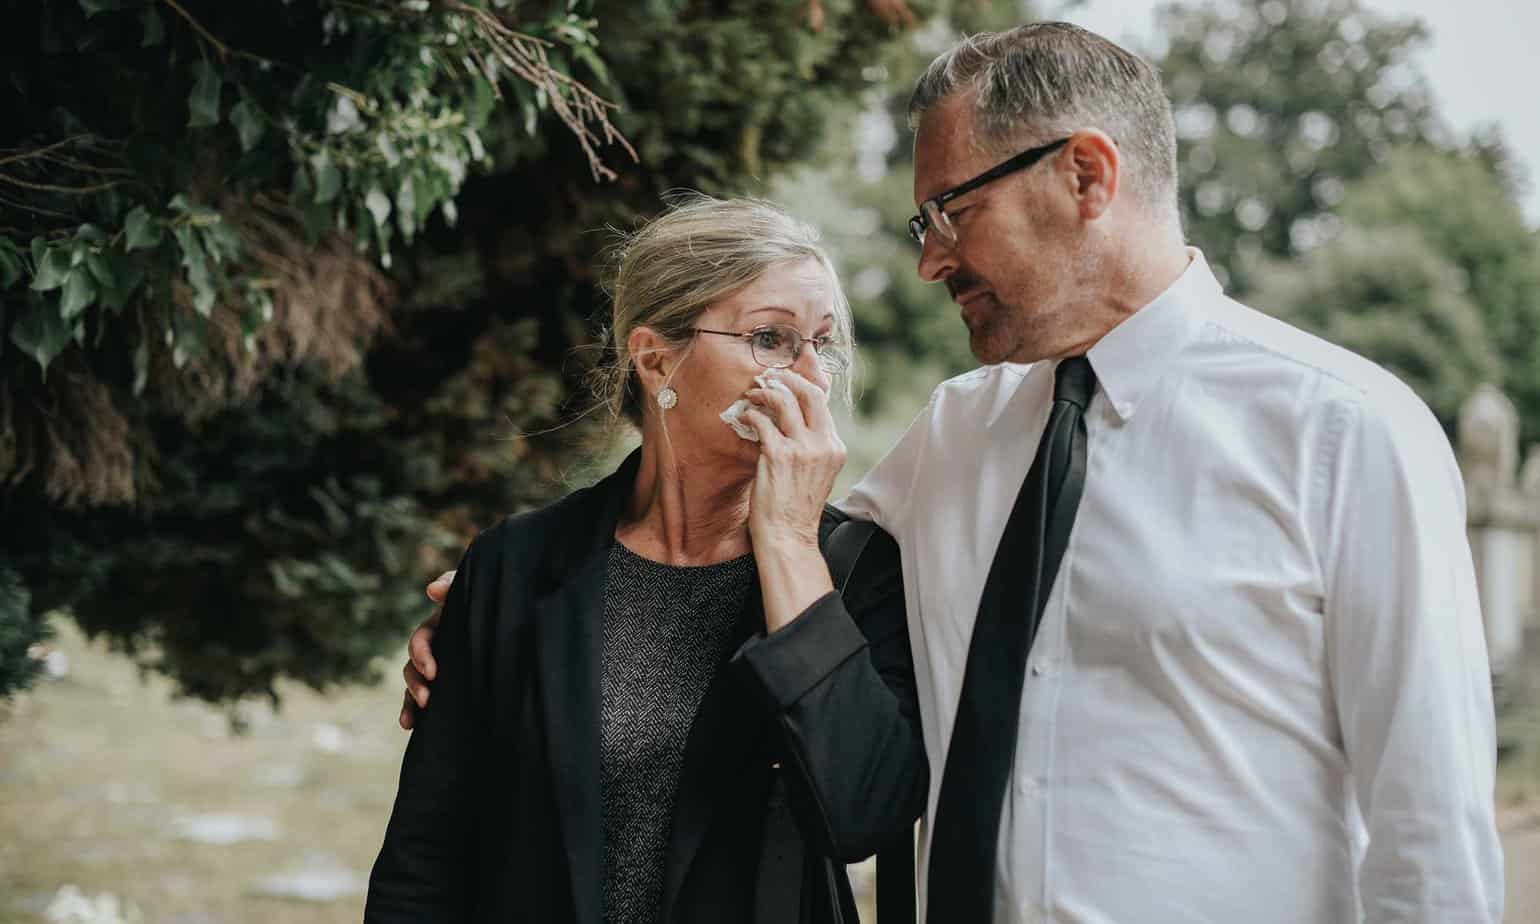 older woman in black covering face with tissue while older man in shirt and tie has arm around her